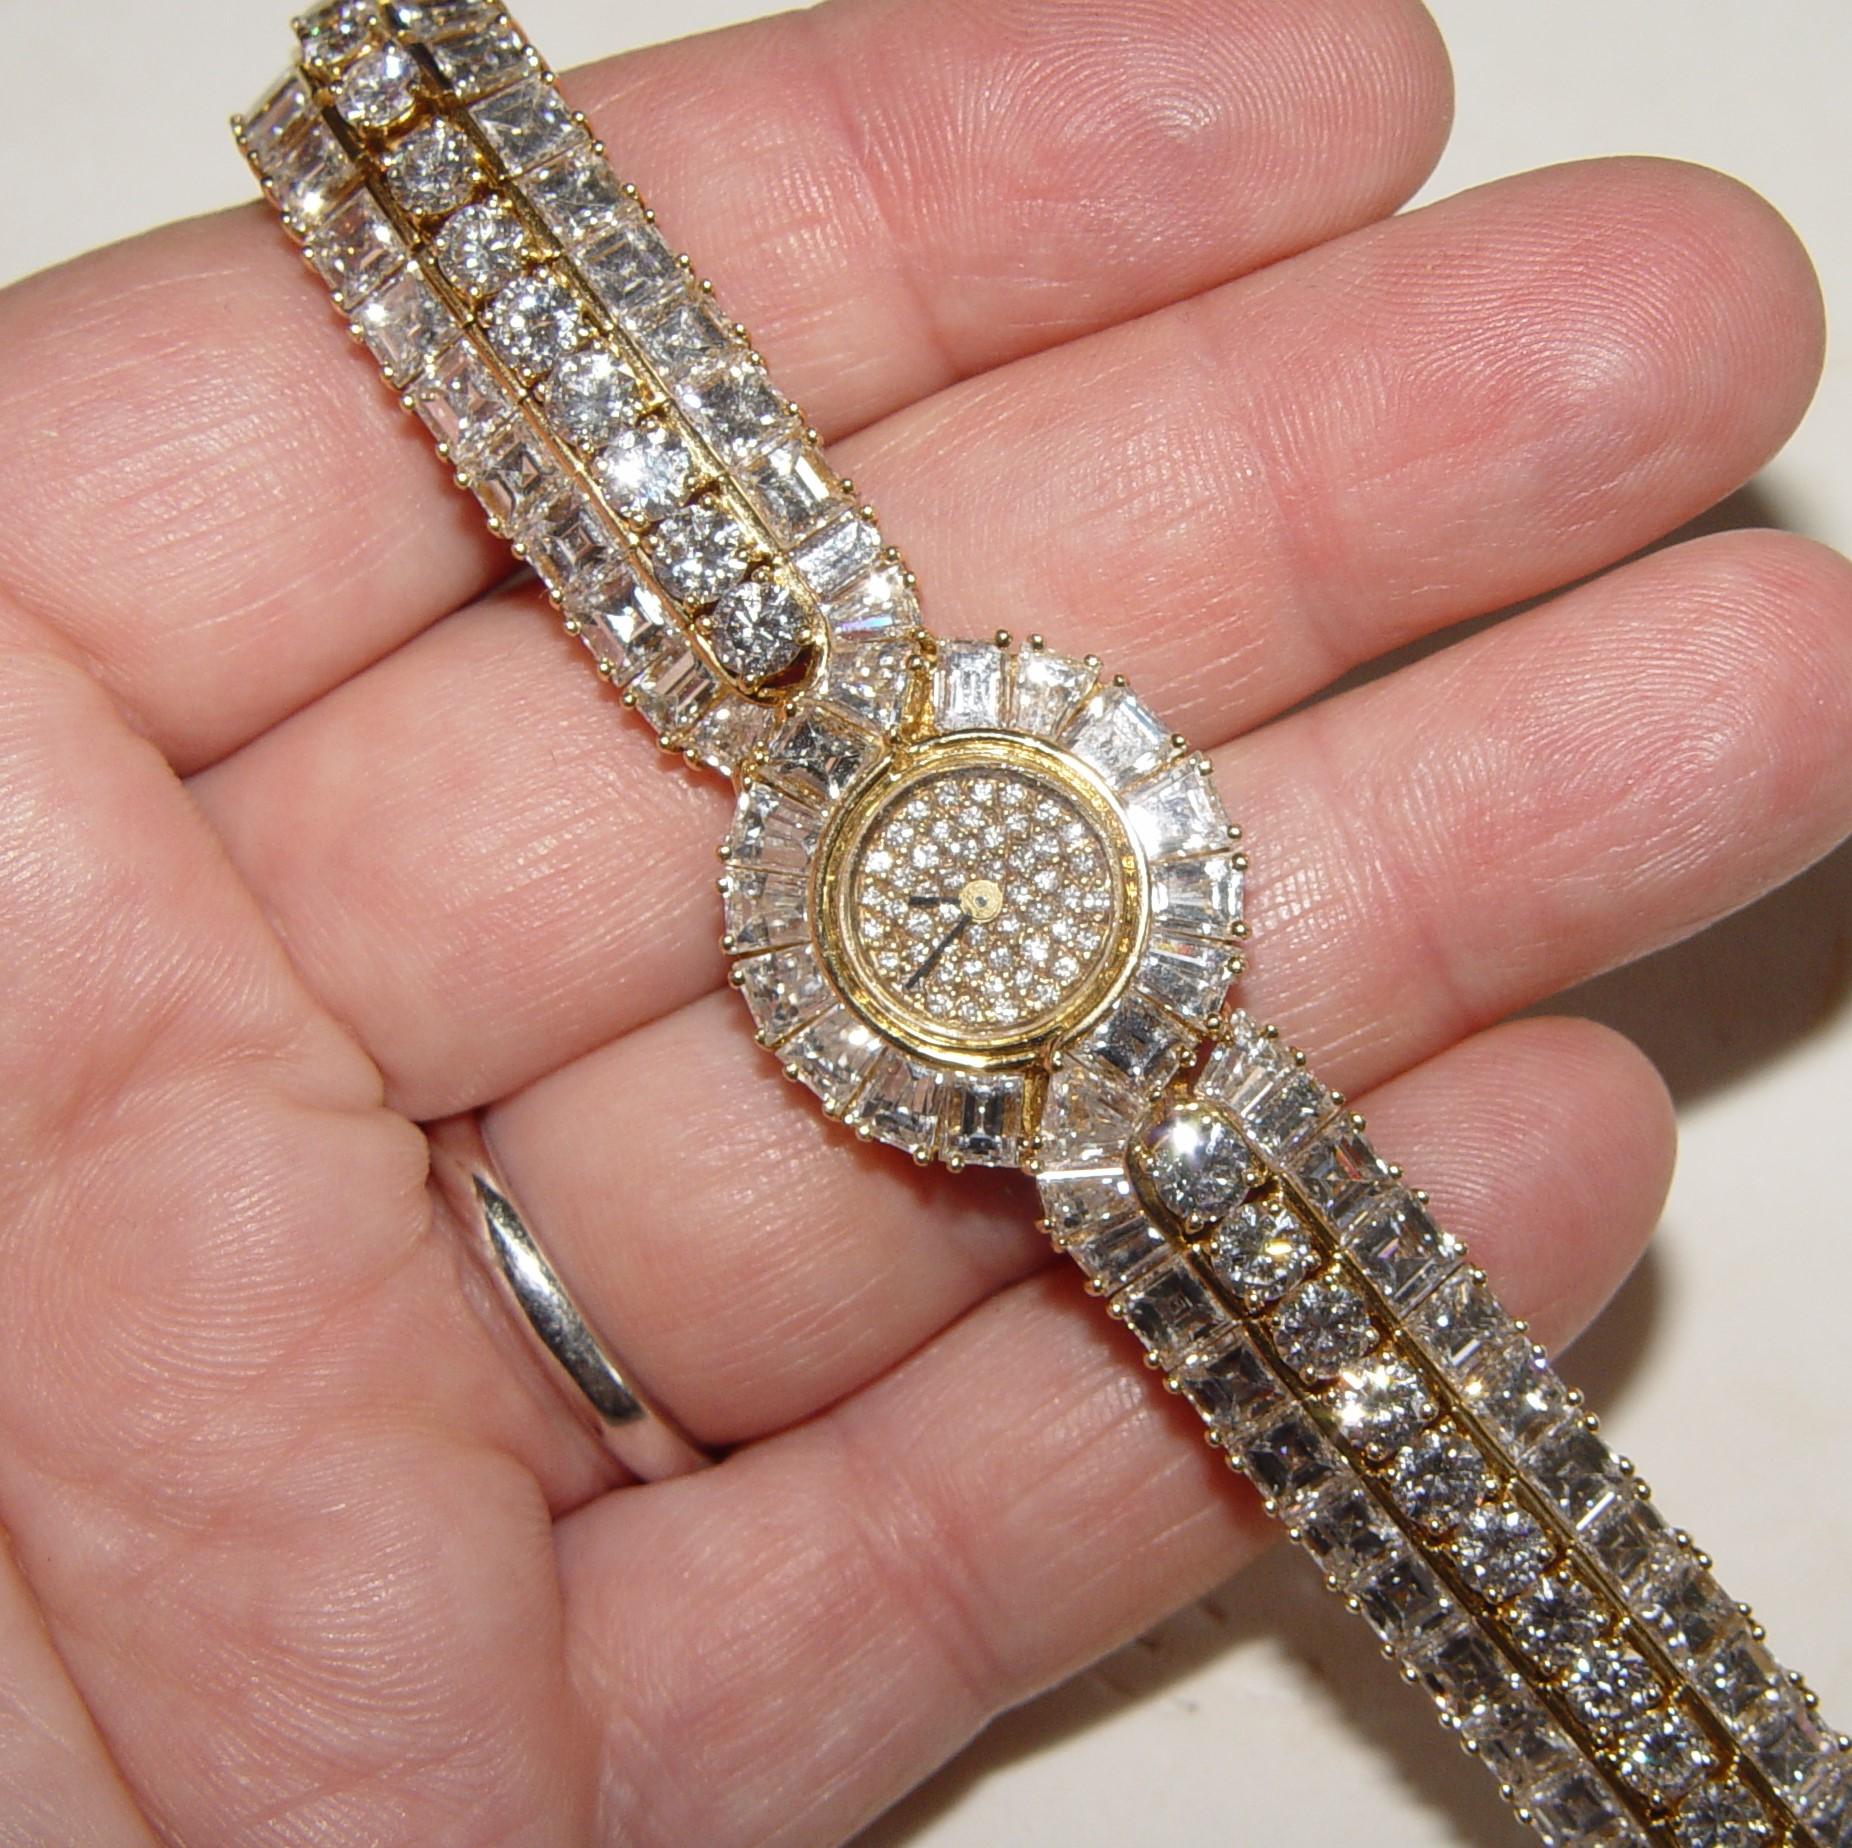 Beautiful lady's watch set with collection quality Round Brilliant and Ascher cut diamonds - well matched in color and clarity. According to our calculation, this watch contains approximately 20-25 carats of diamonds (D-E-F color and VS clarity.